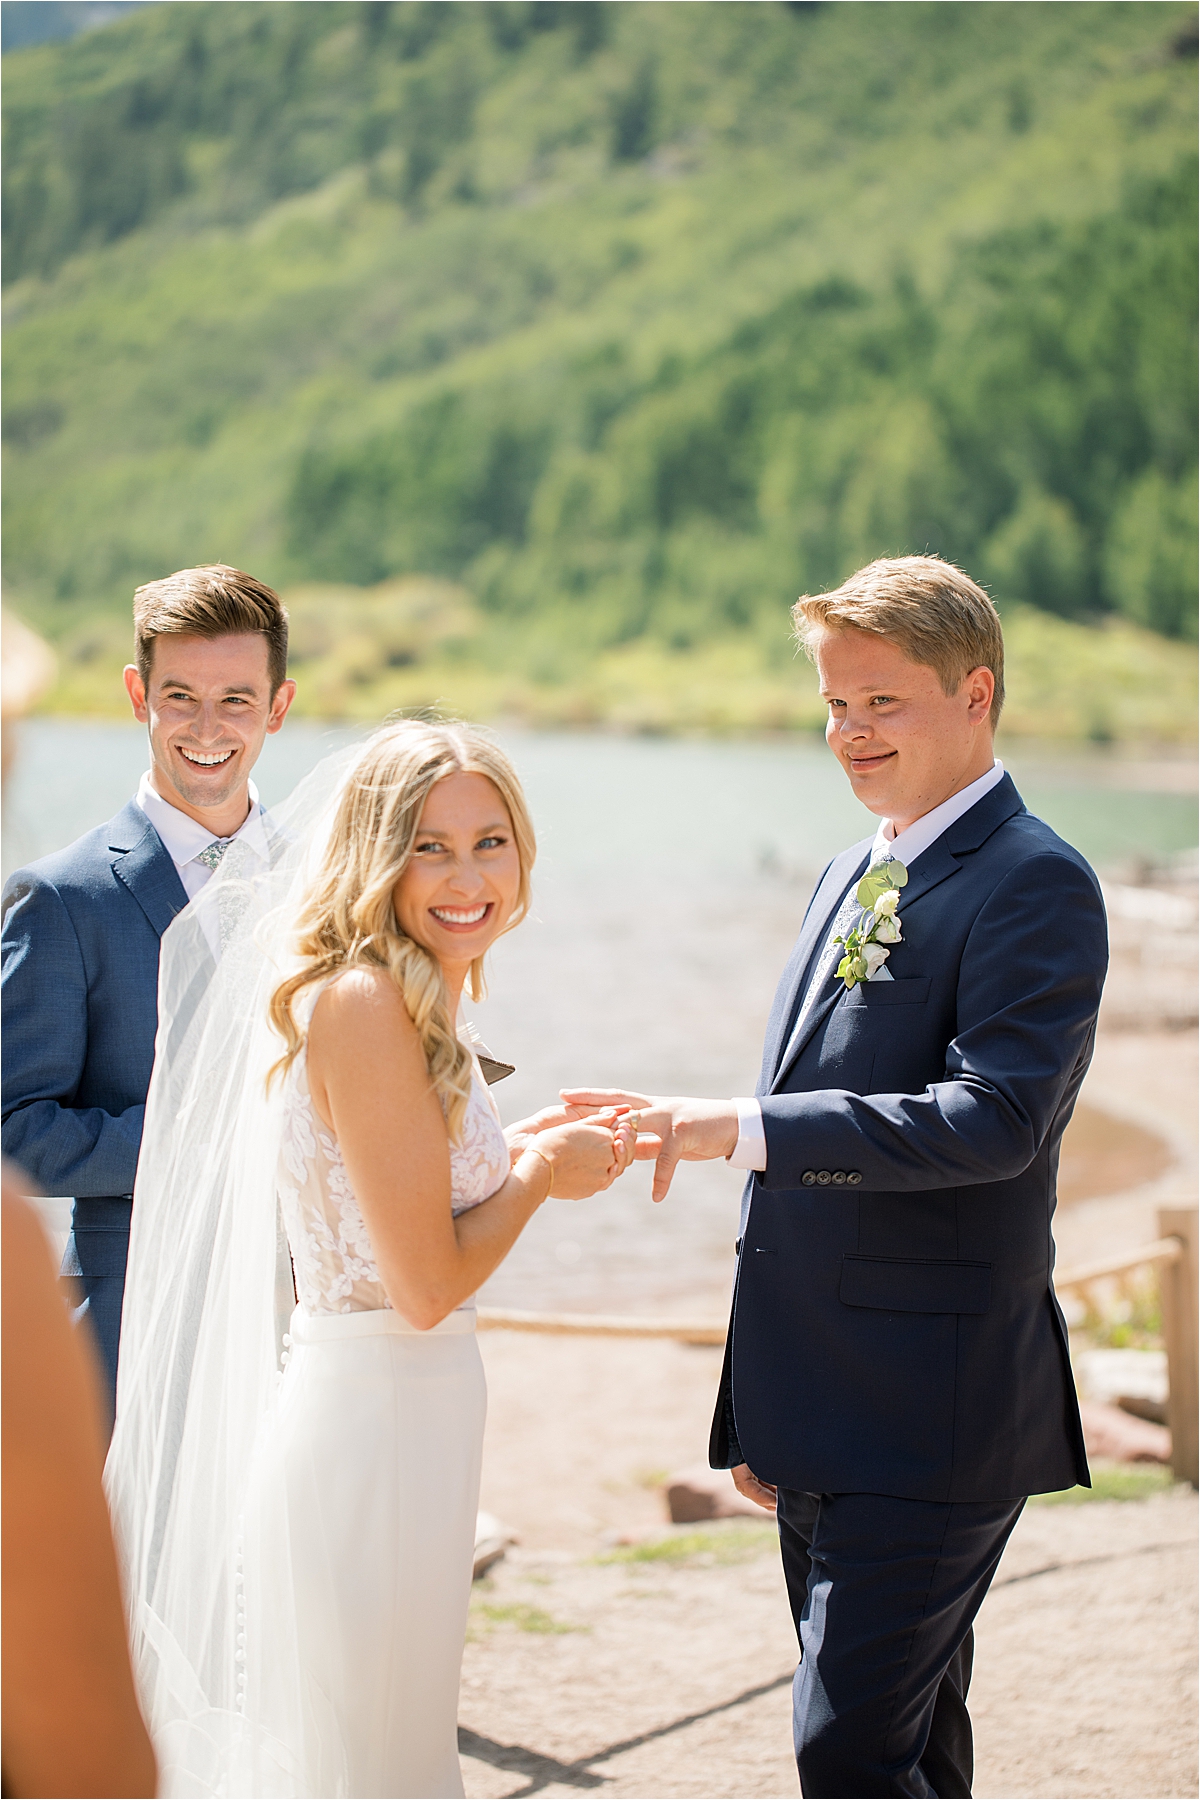 The ring ceremony at a small wedding at Maroon Bells Aspen